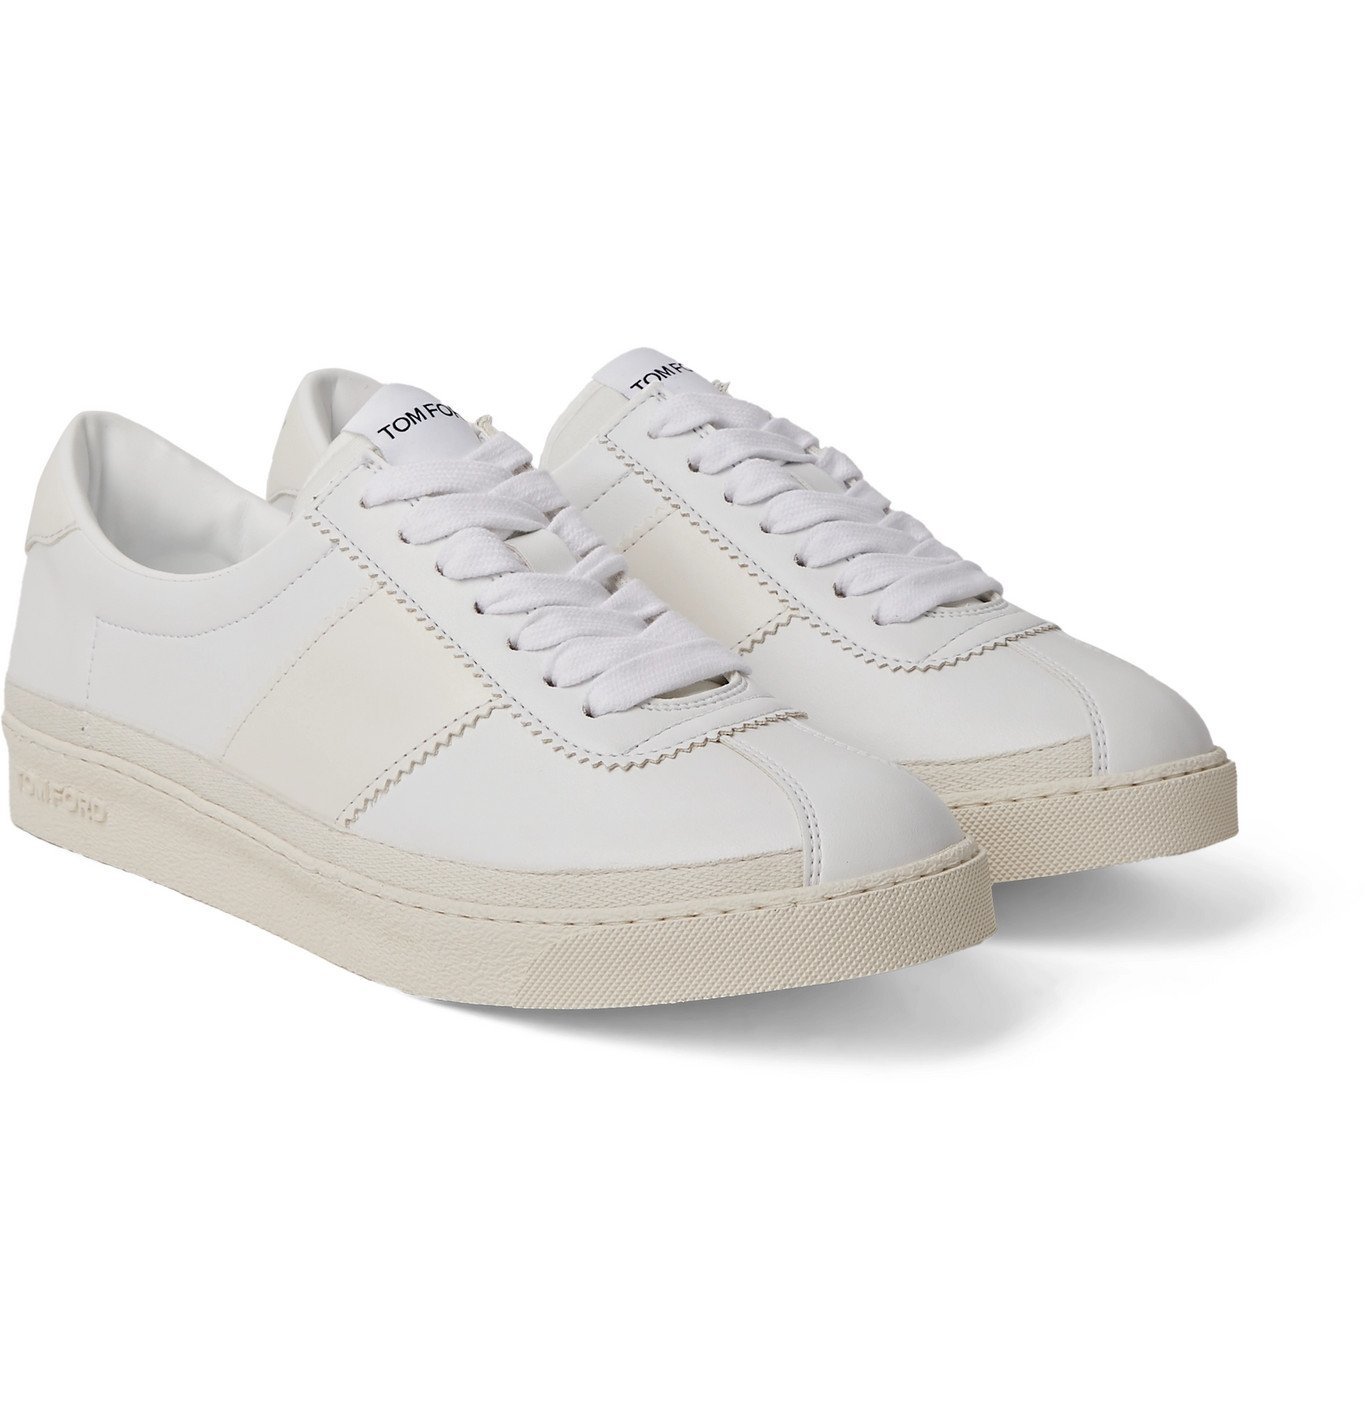 TOM FORD - Bannister Leather Sneakers - White TOM FORD